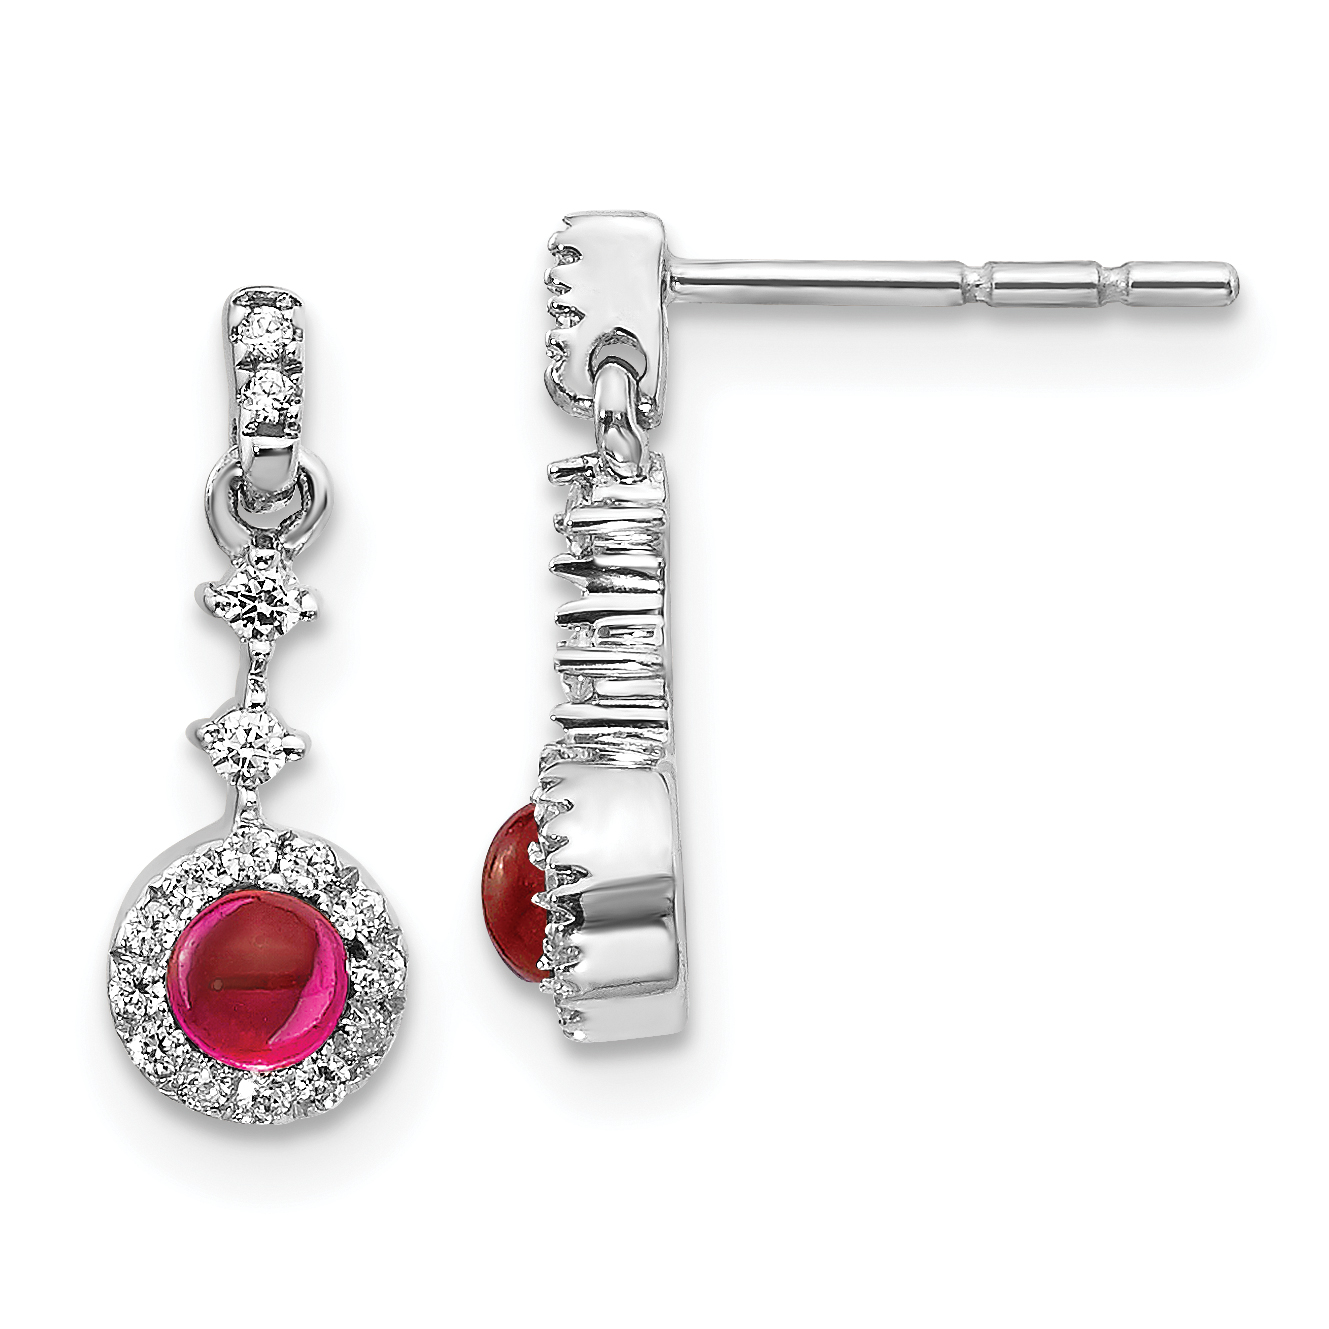 capucine blossom stud earrings with cabouchon ruby – Capucine De Wulf